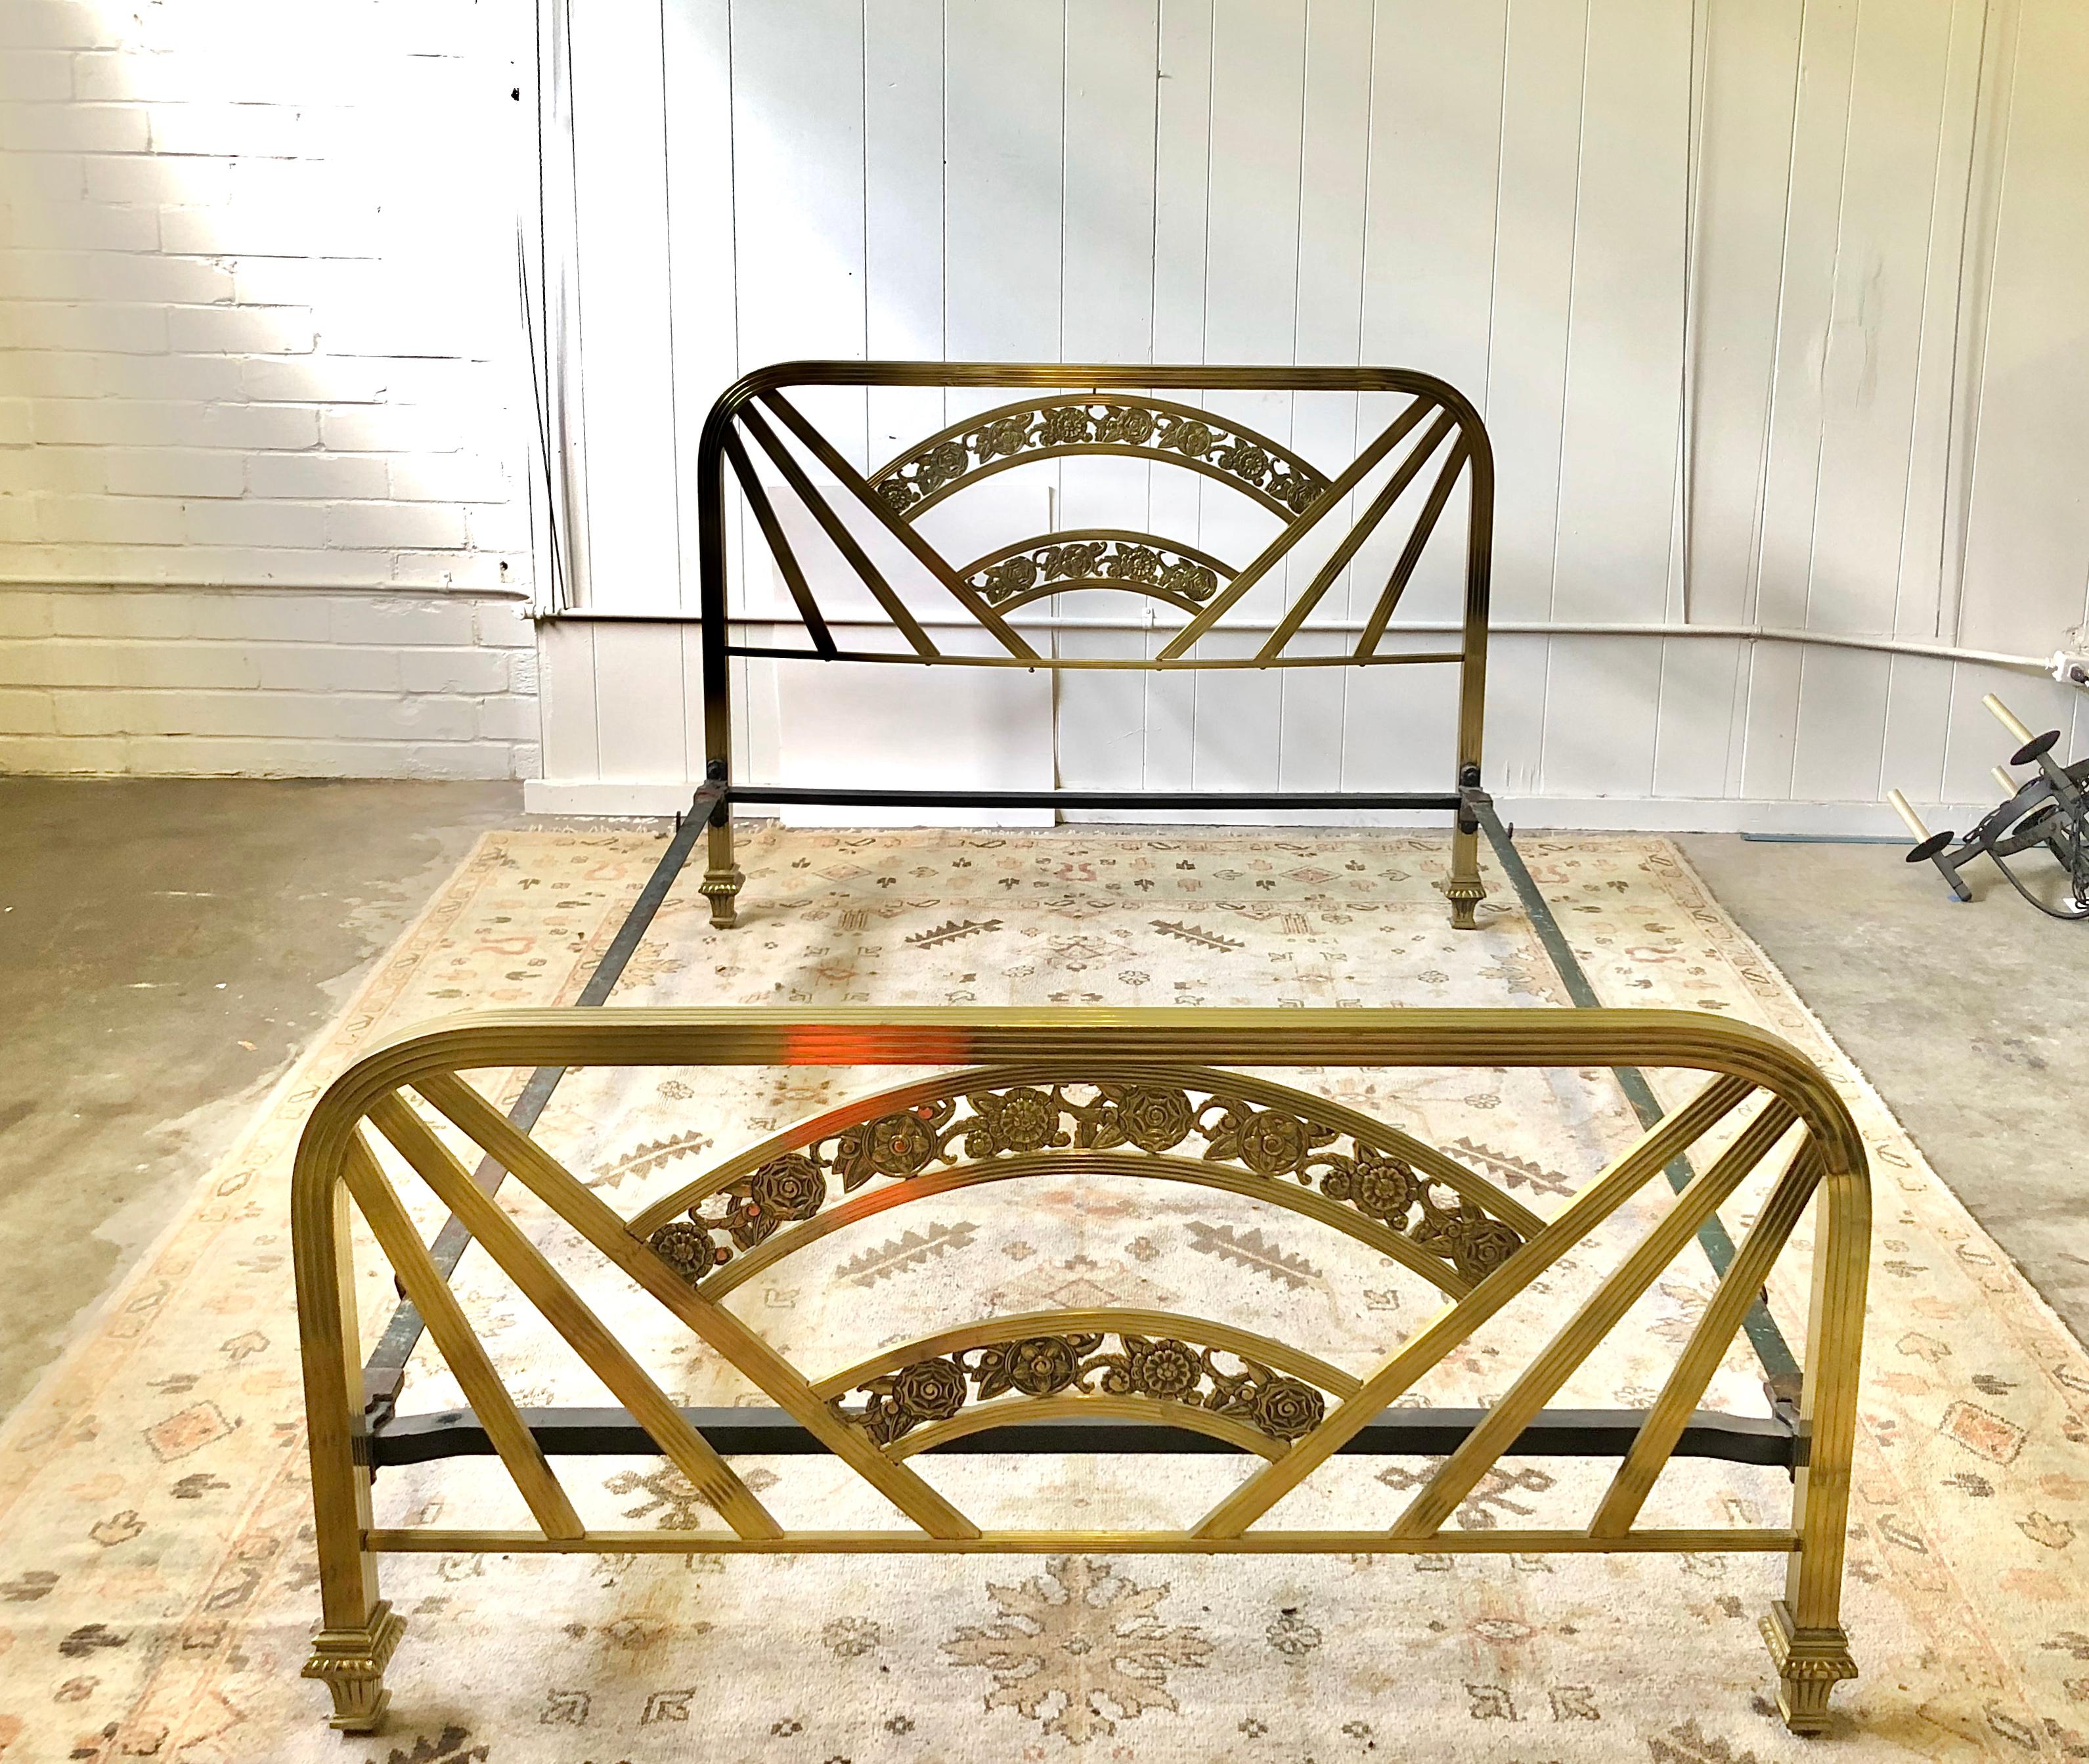 Early 20th century Art Deco full size bed frame with decorative headboard and footboard of brass and including the original side rails. The frame measures: 53.5